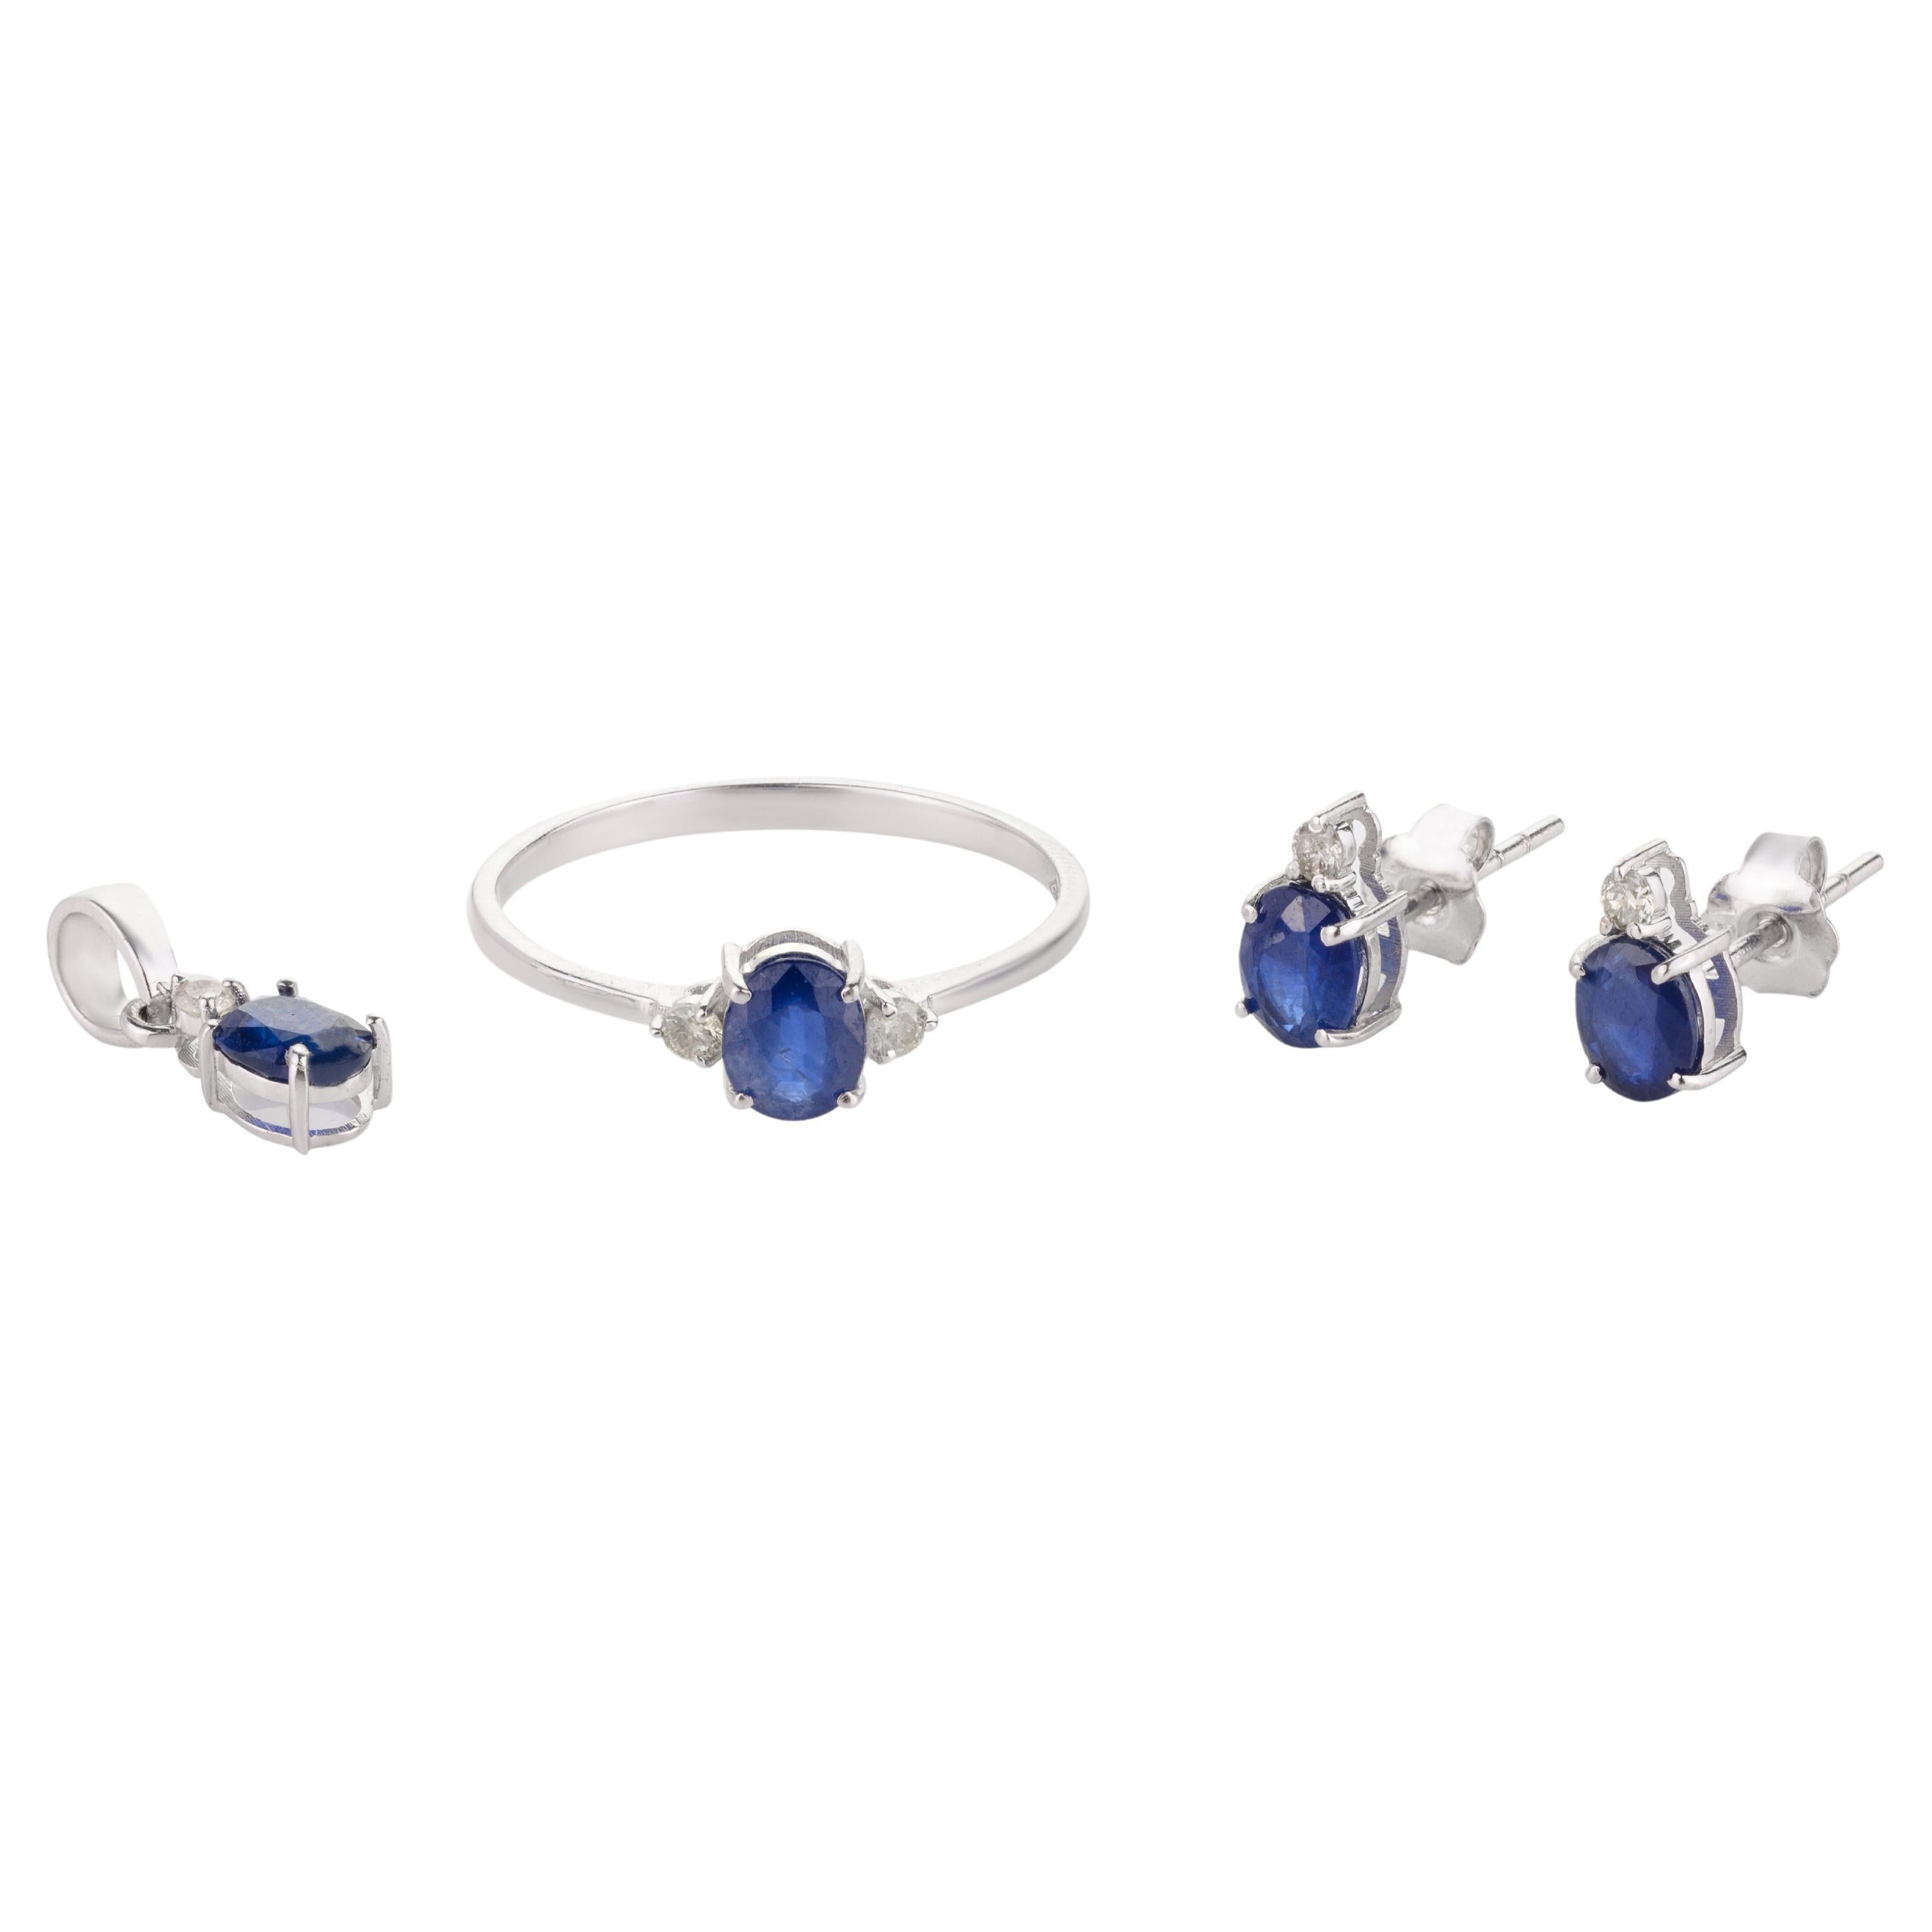 For Sale:  18k White Gold Blue Sapphire and Diamond Pendant, Ring and Earring Jewelry Set